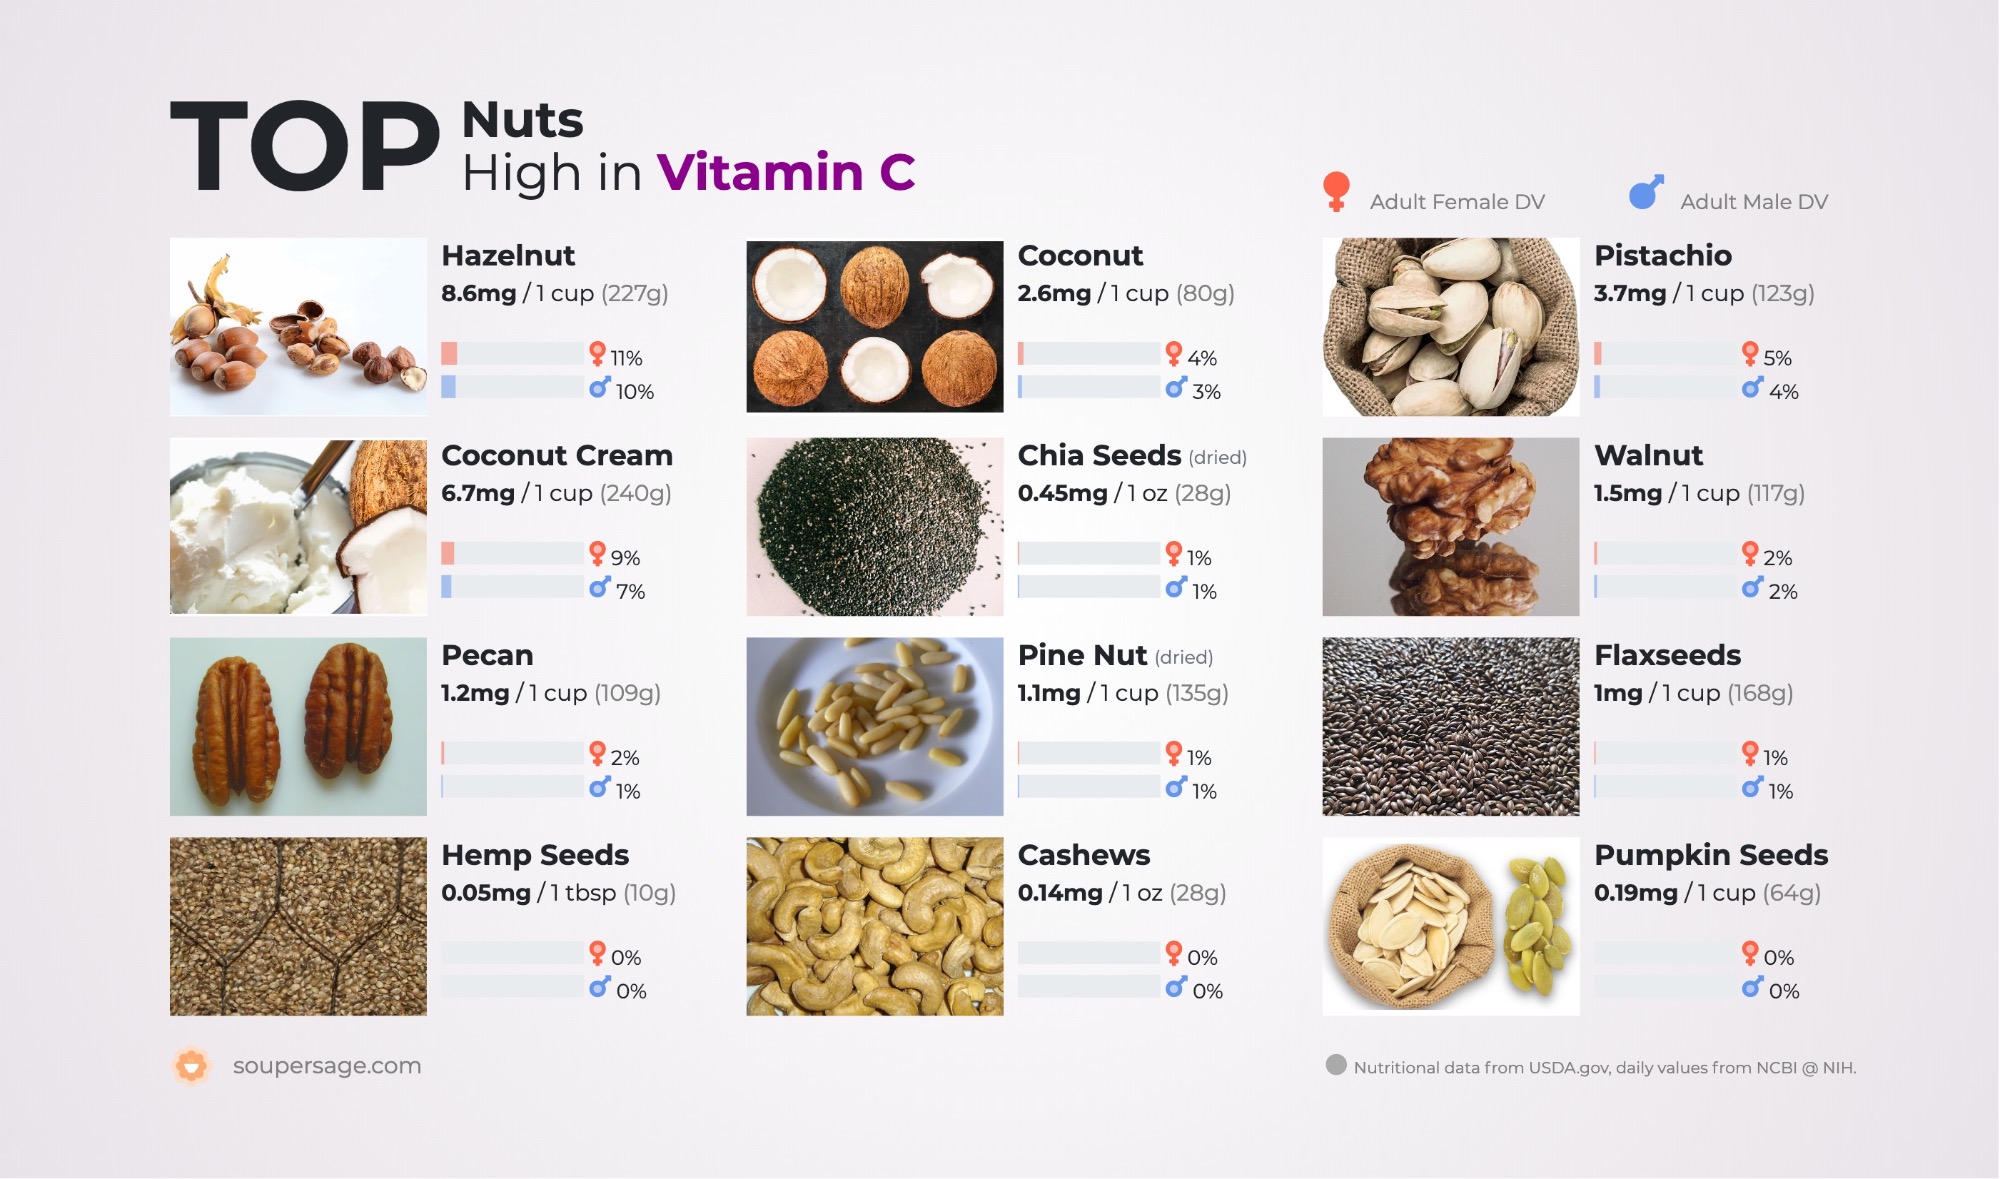 image of Top Nuts High in Vitamin C